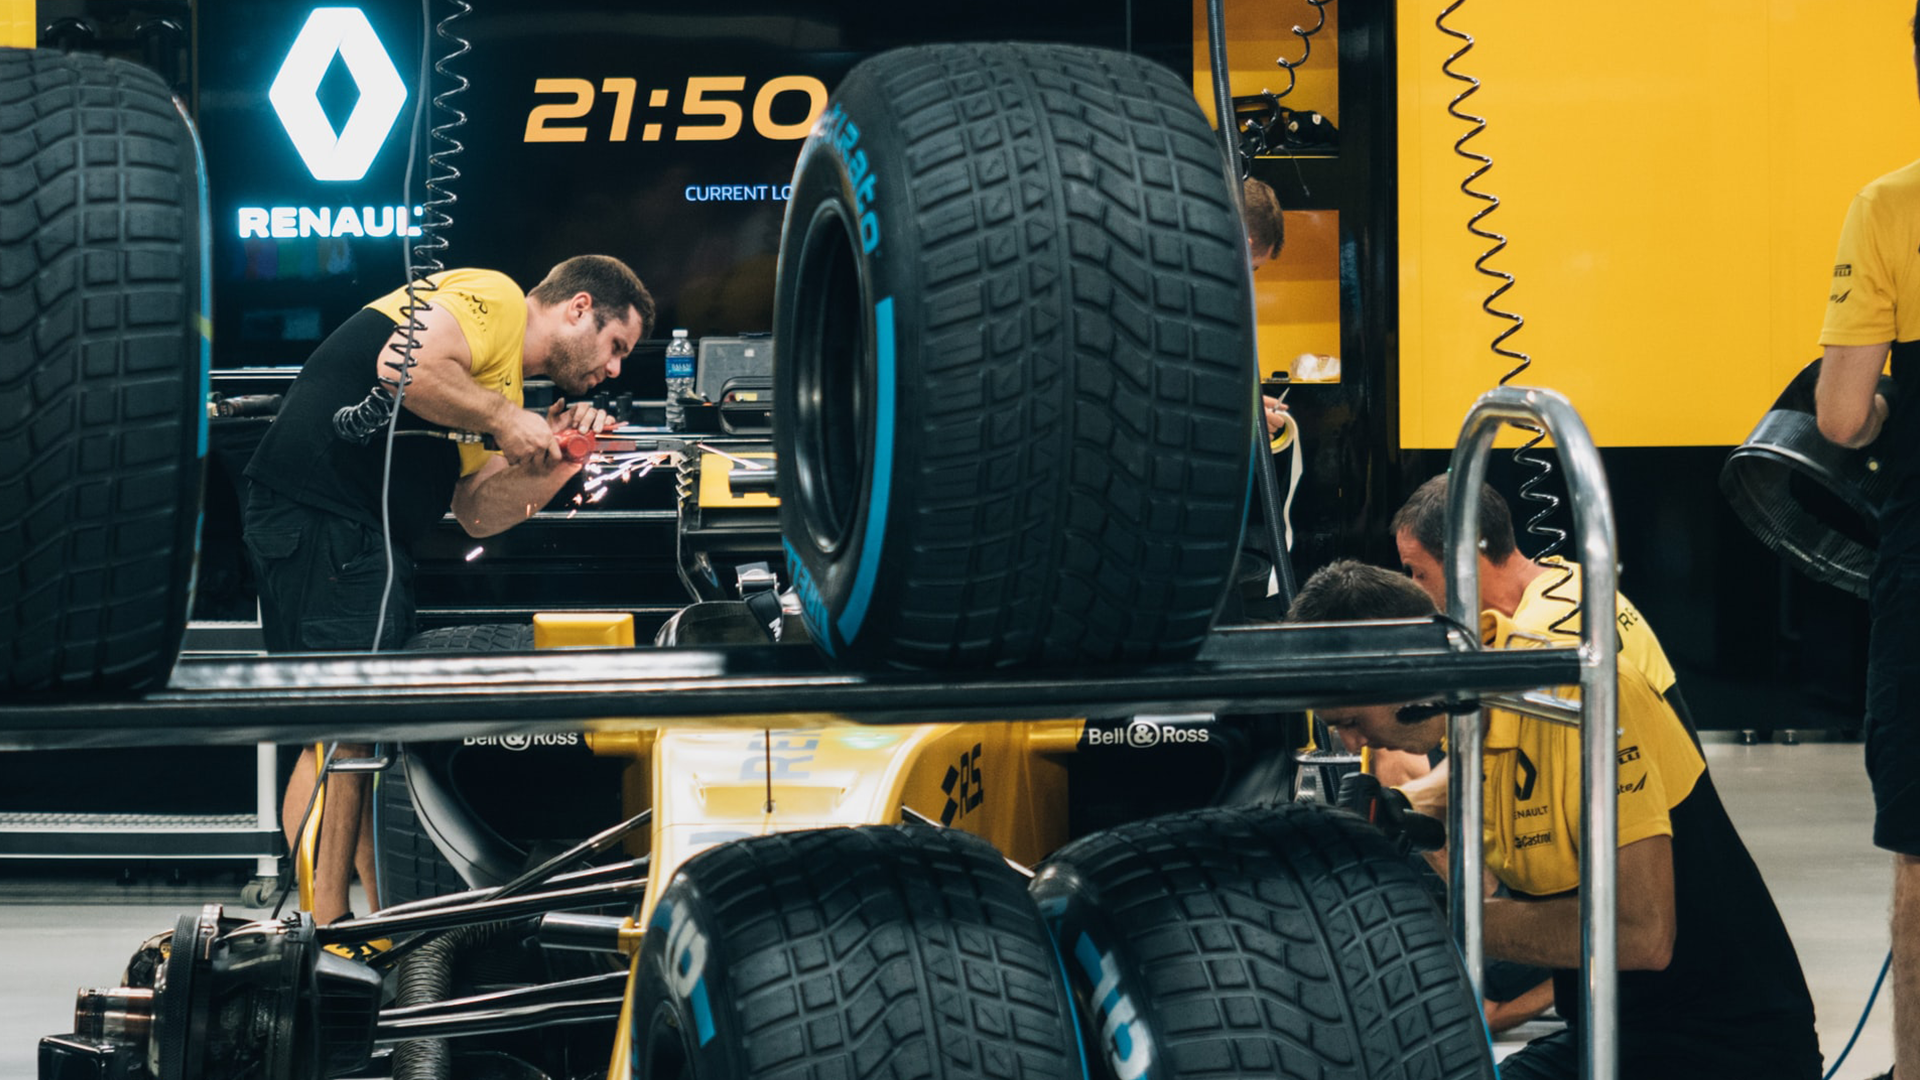 unsplash-logoGoh Rhy Yan Rumours are abound that Ricciardo is unhappy at Renault, and the team have openly admitted they'll need to do better to keep him. Will Ricciardo take this opportunity to jump ship to a more competitive outfit?